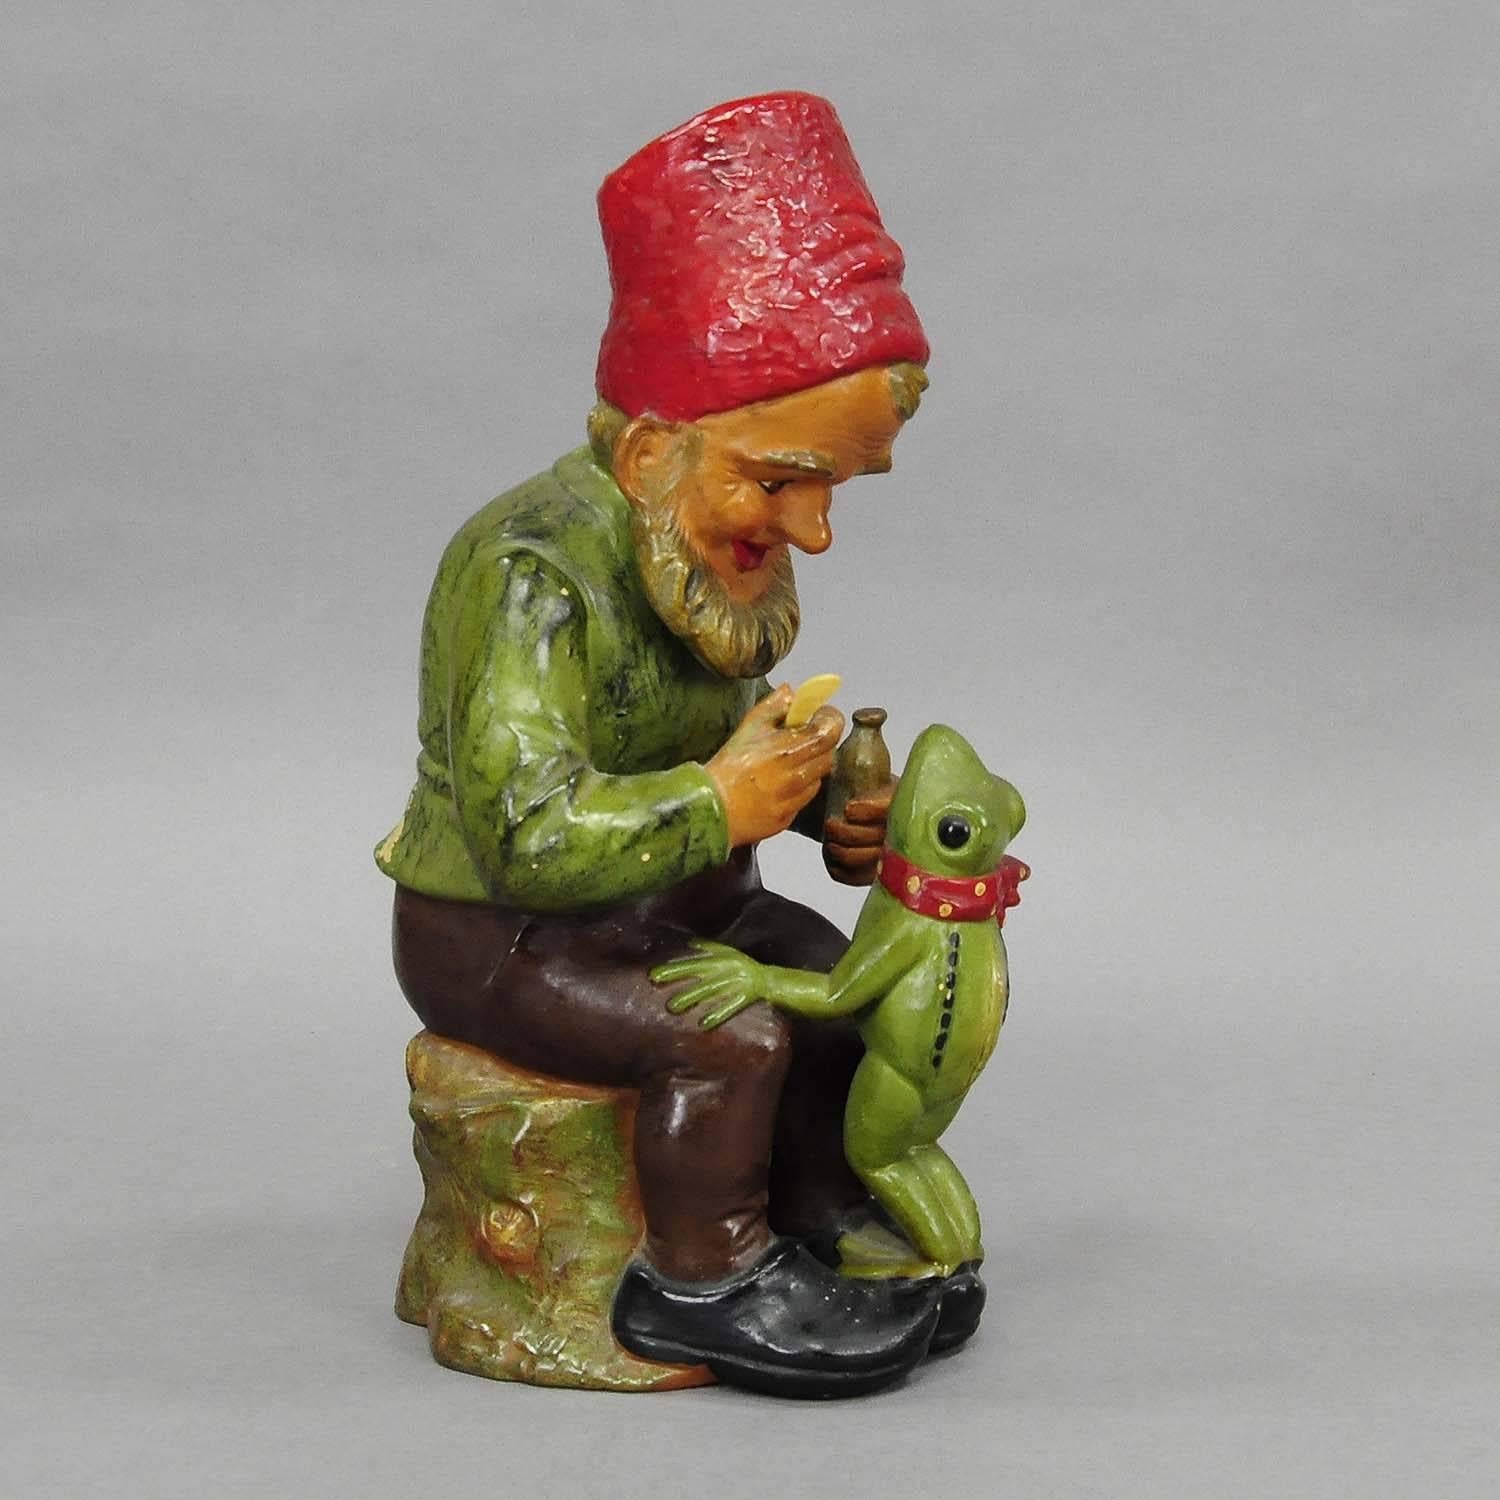 A great and rare sculpture of a dwarf delivering medicine to a frog which has a cold. made of terracotta, with original painting, most probably manufactured by Heissner, Germany, circa 1930.